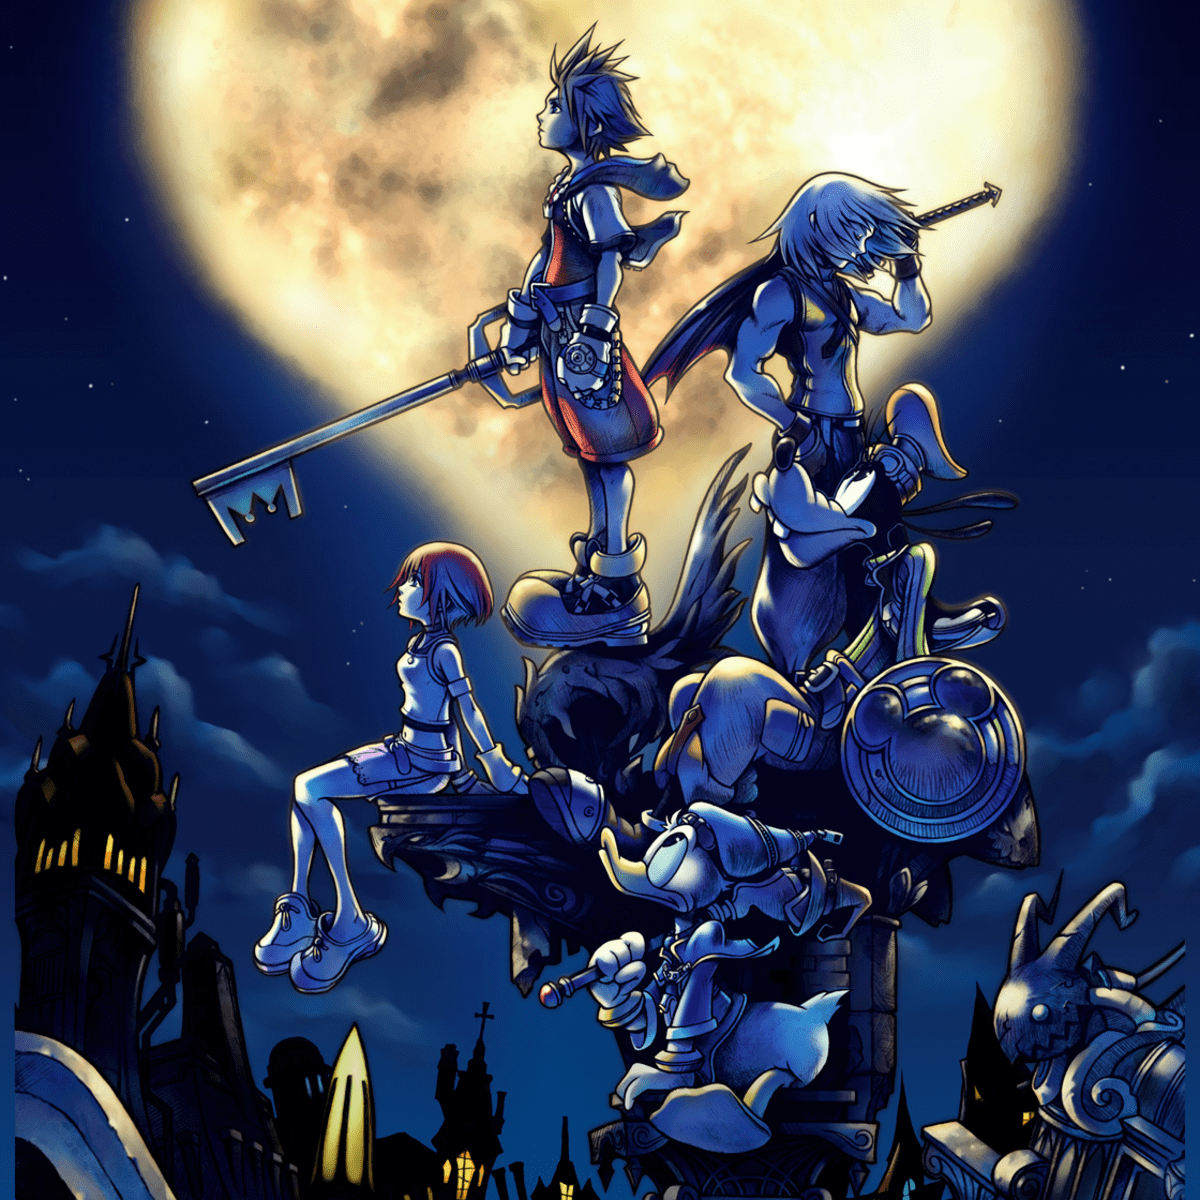 BELOVED KINGDOM HEARTS TITLES OUT NOW ON NINTENDO SWITCH VIA CLOUD -  Square Enix North America Press Hub